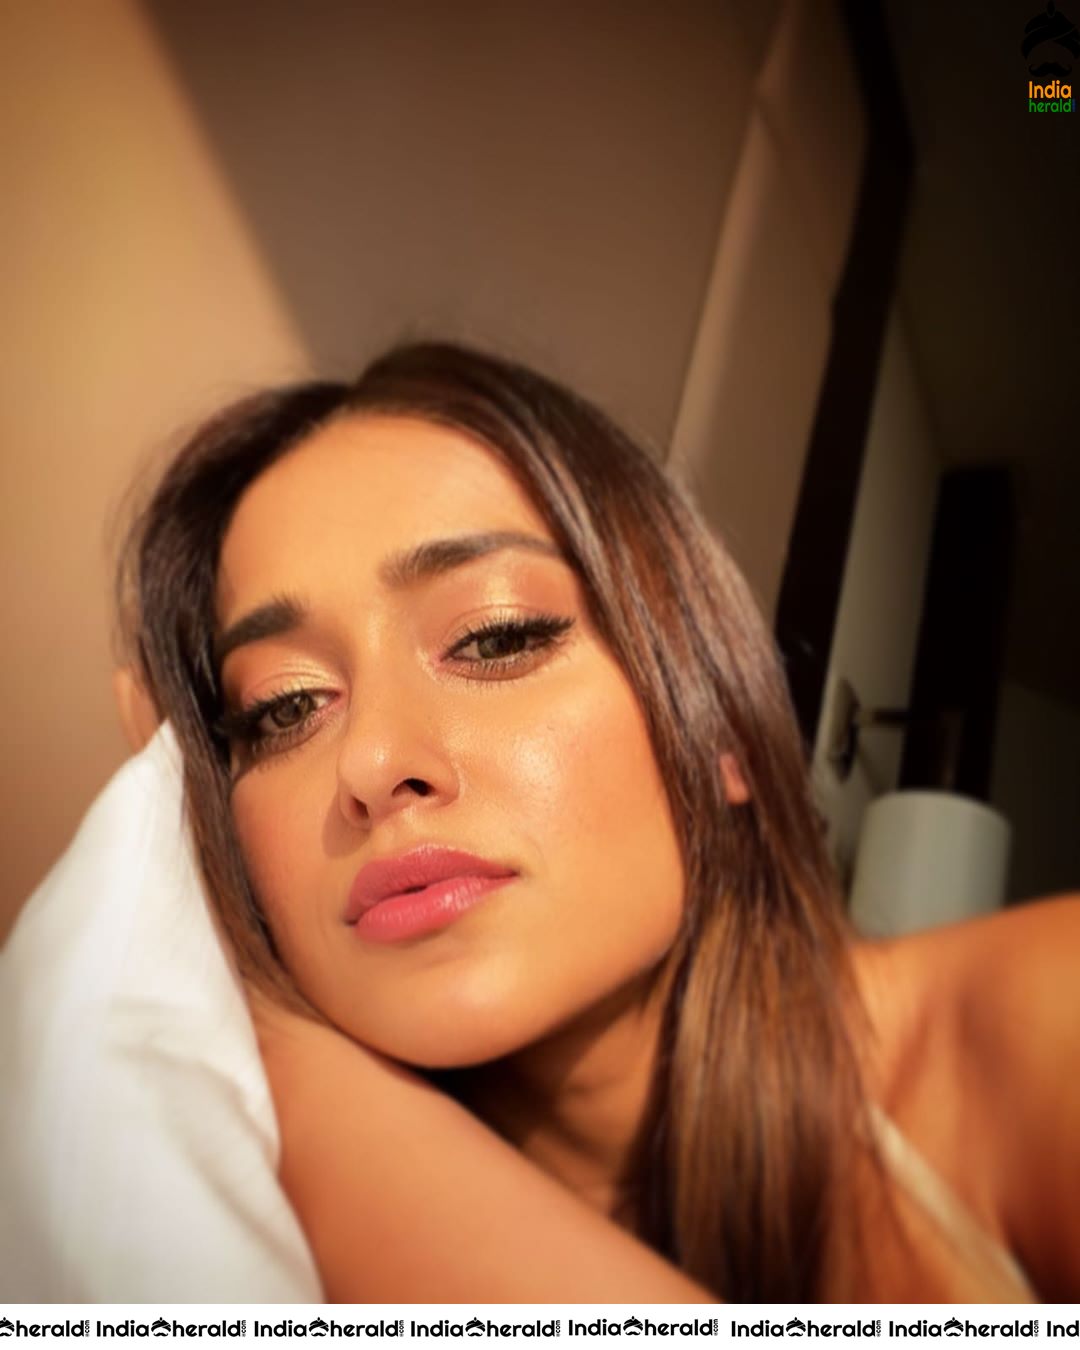 Ileana Unseen Hottest Photos in Brassiere and Undies while chilling by Beach Side